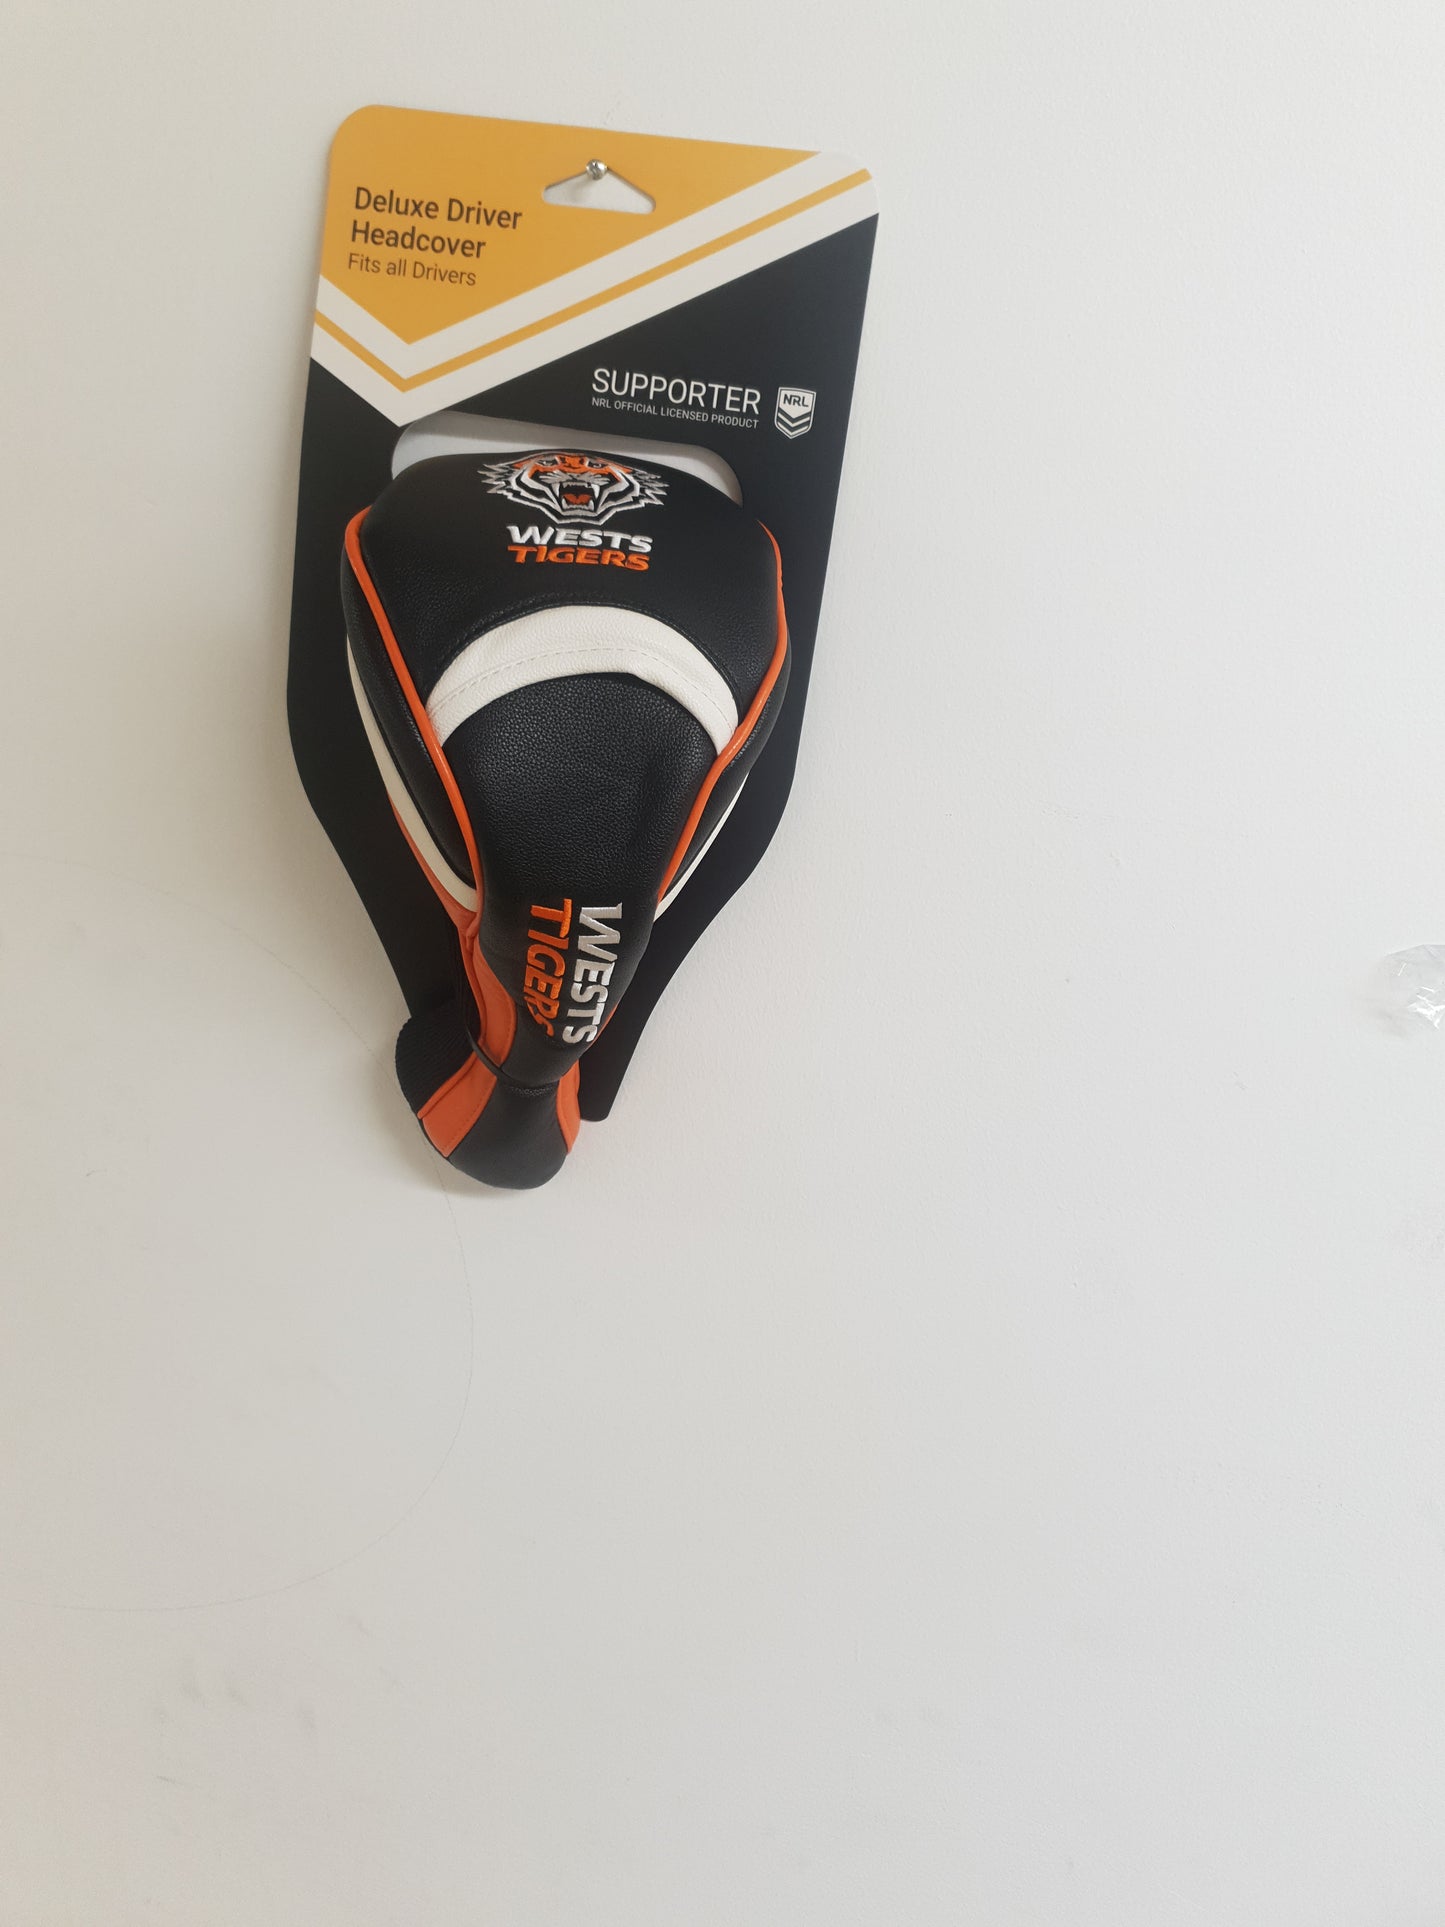 Wests Tigers Deluxe Driver Headcover